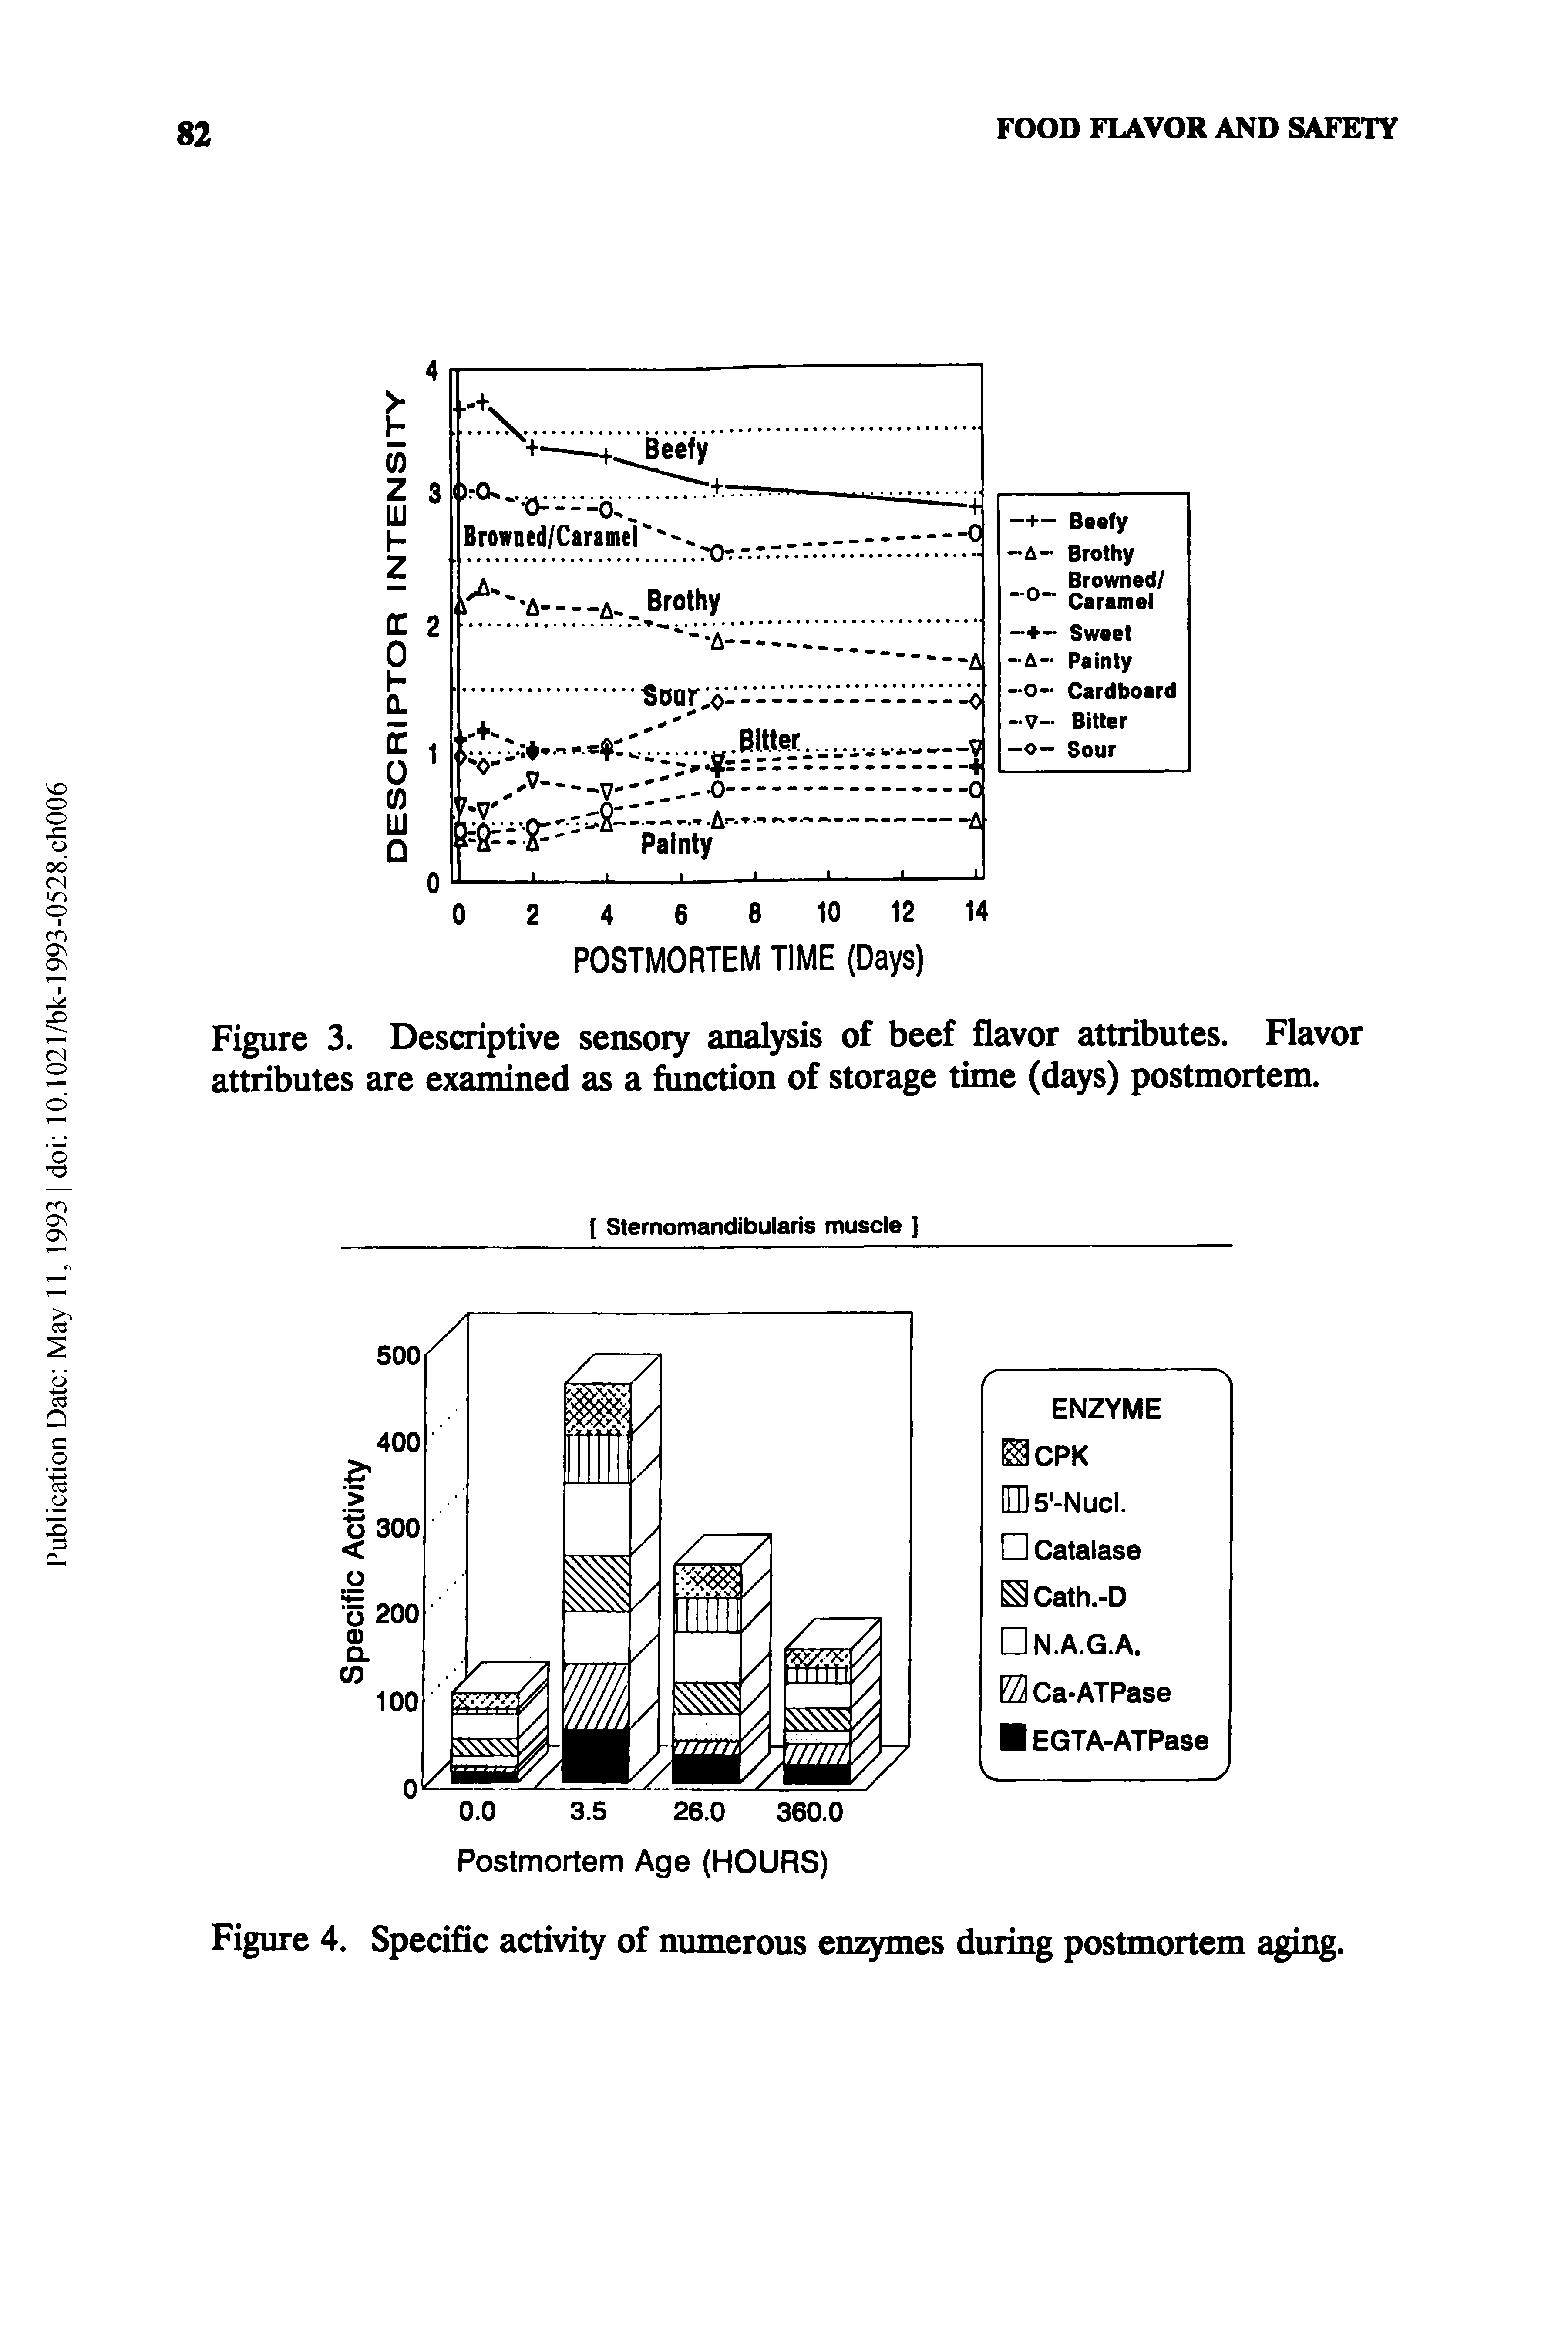 Figure 3. Descriptive sensory analysis of beef flavor attributes. Flavor attributes are examined as a function of storage time (days) postmortem.